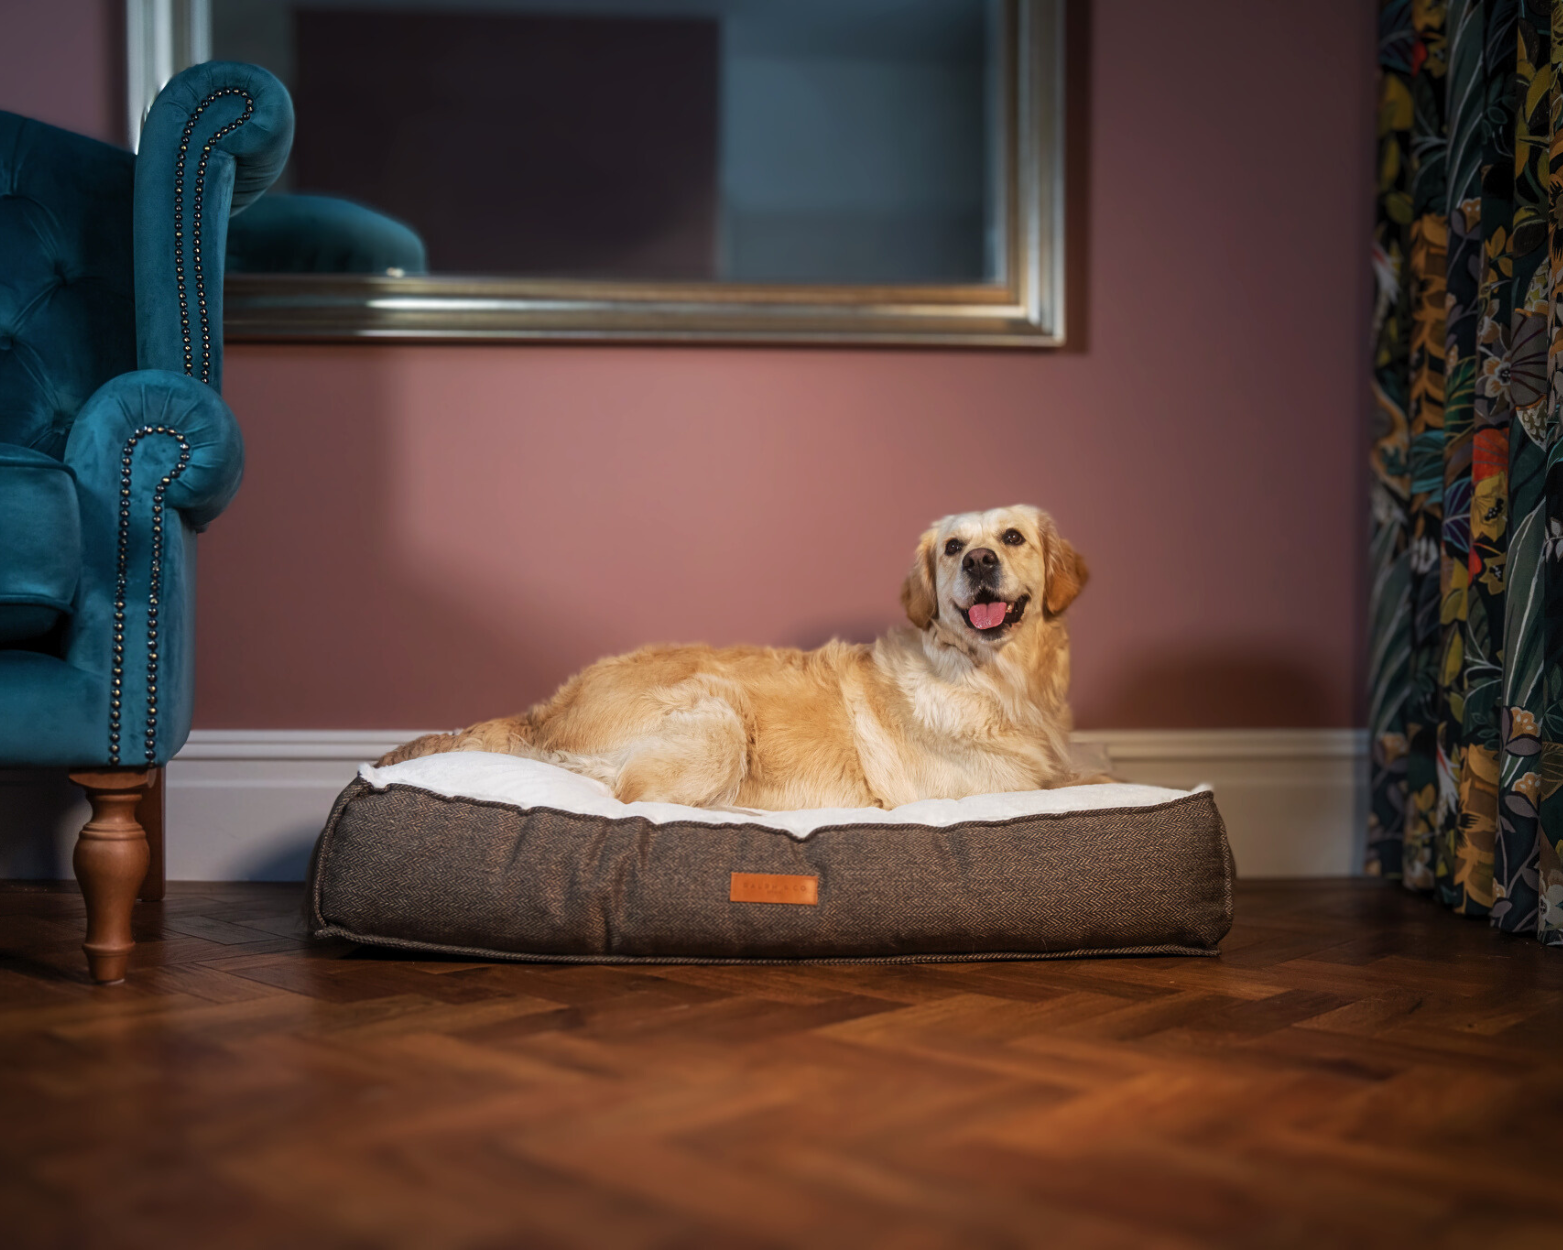 A golden retriever sits on a Lincoln pillow bed in a fancy living room